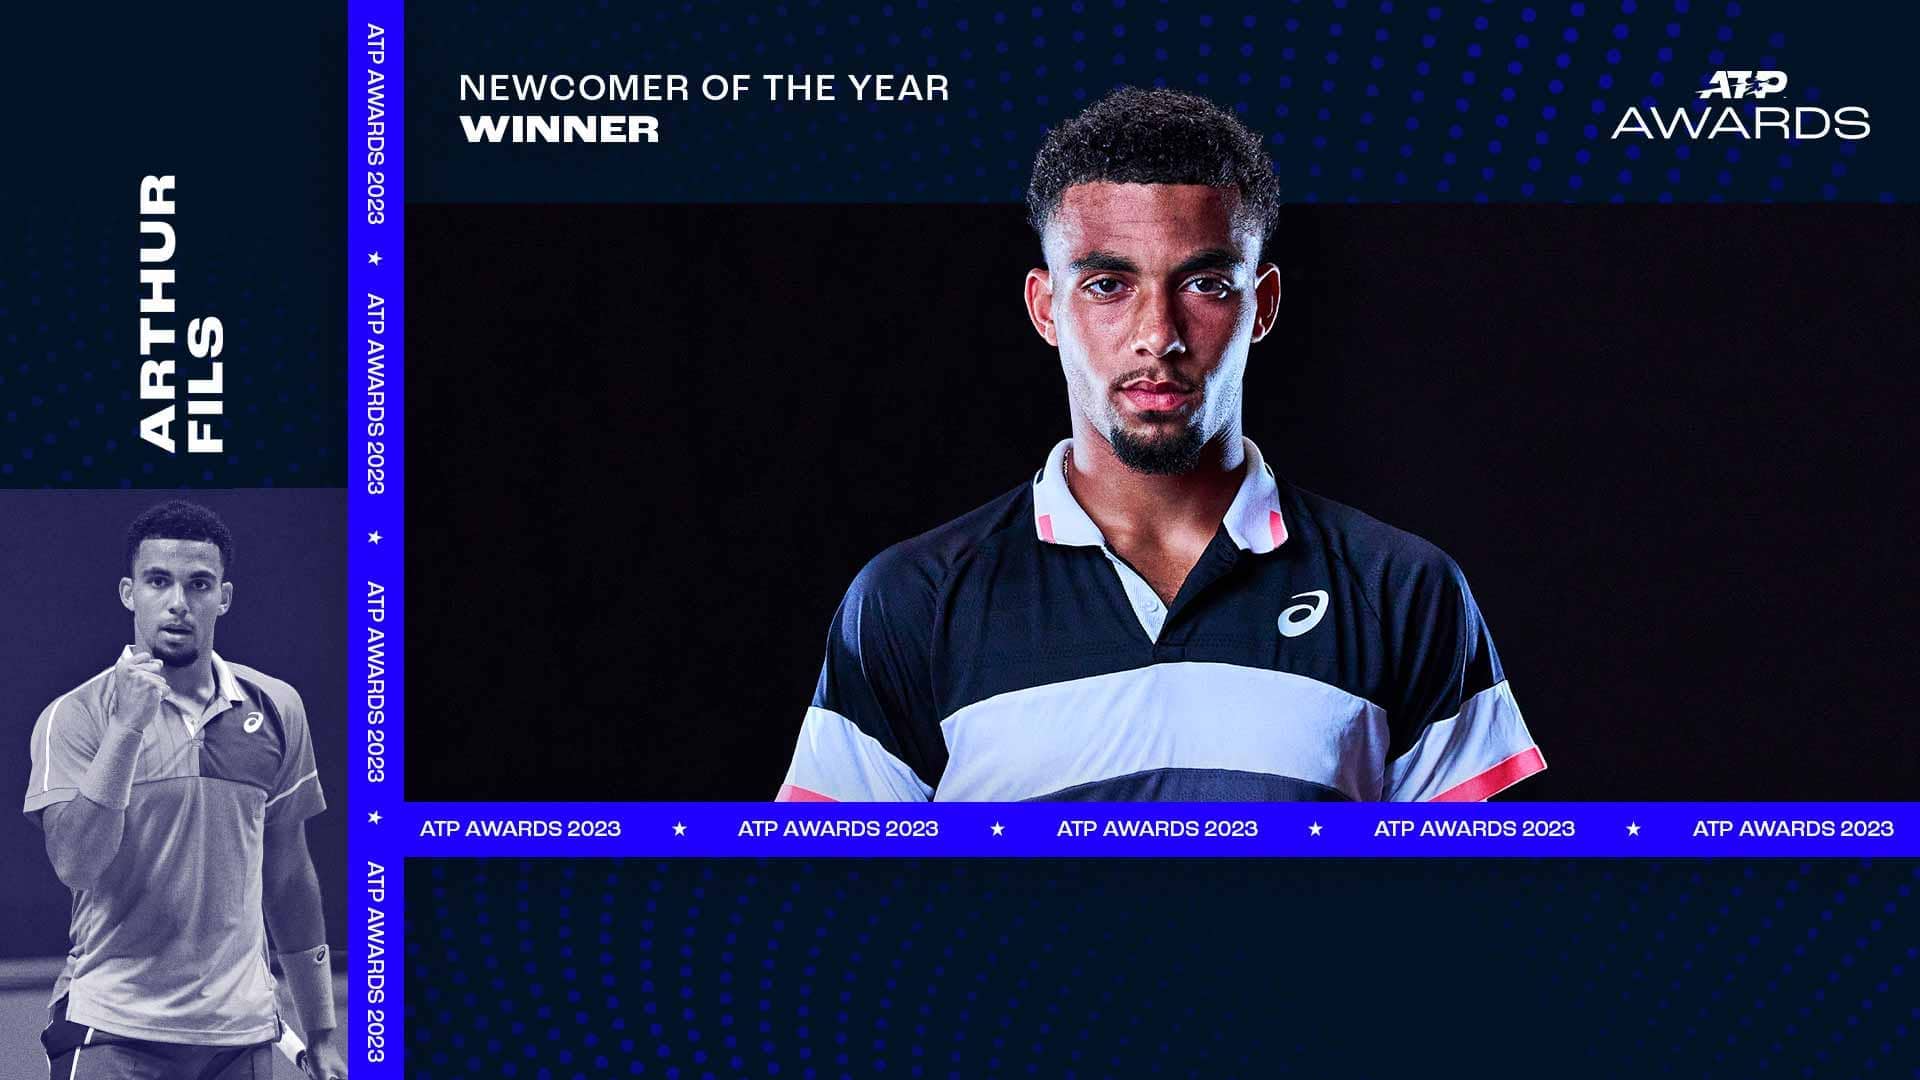 Here Comes Fils: #NextGenATP Frenchman Wins 2023 Newcomer Of The Year Award